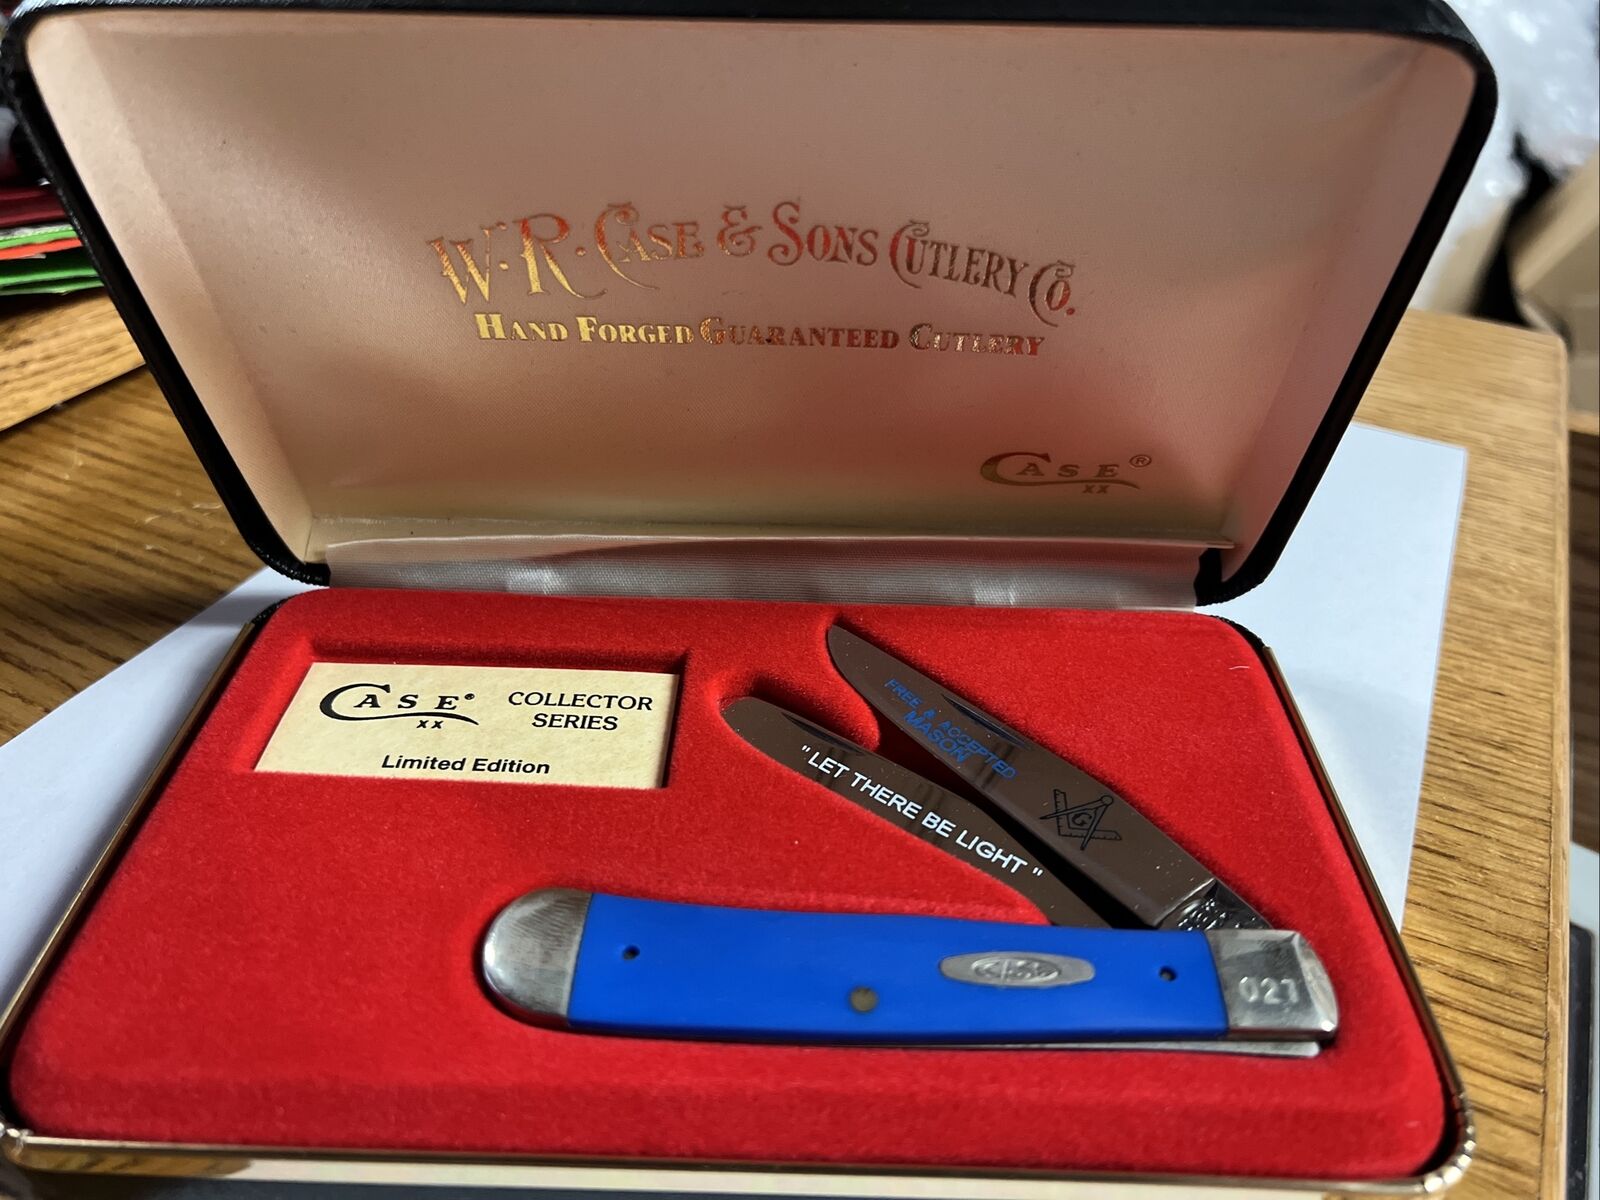 W.R. Case & Sons Cutlery Co.  Case XX  Collectors Series #27 Of Only 100